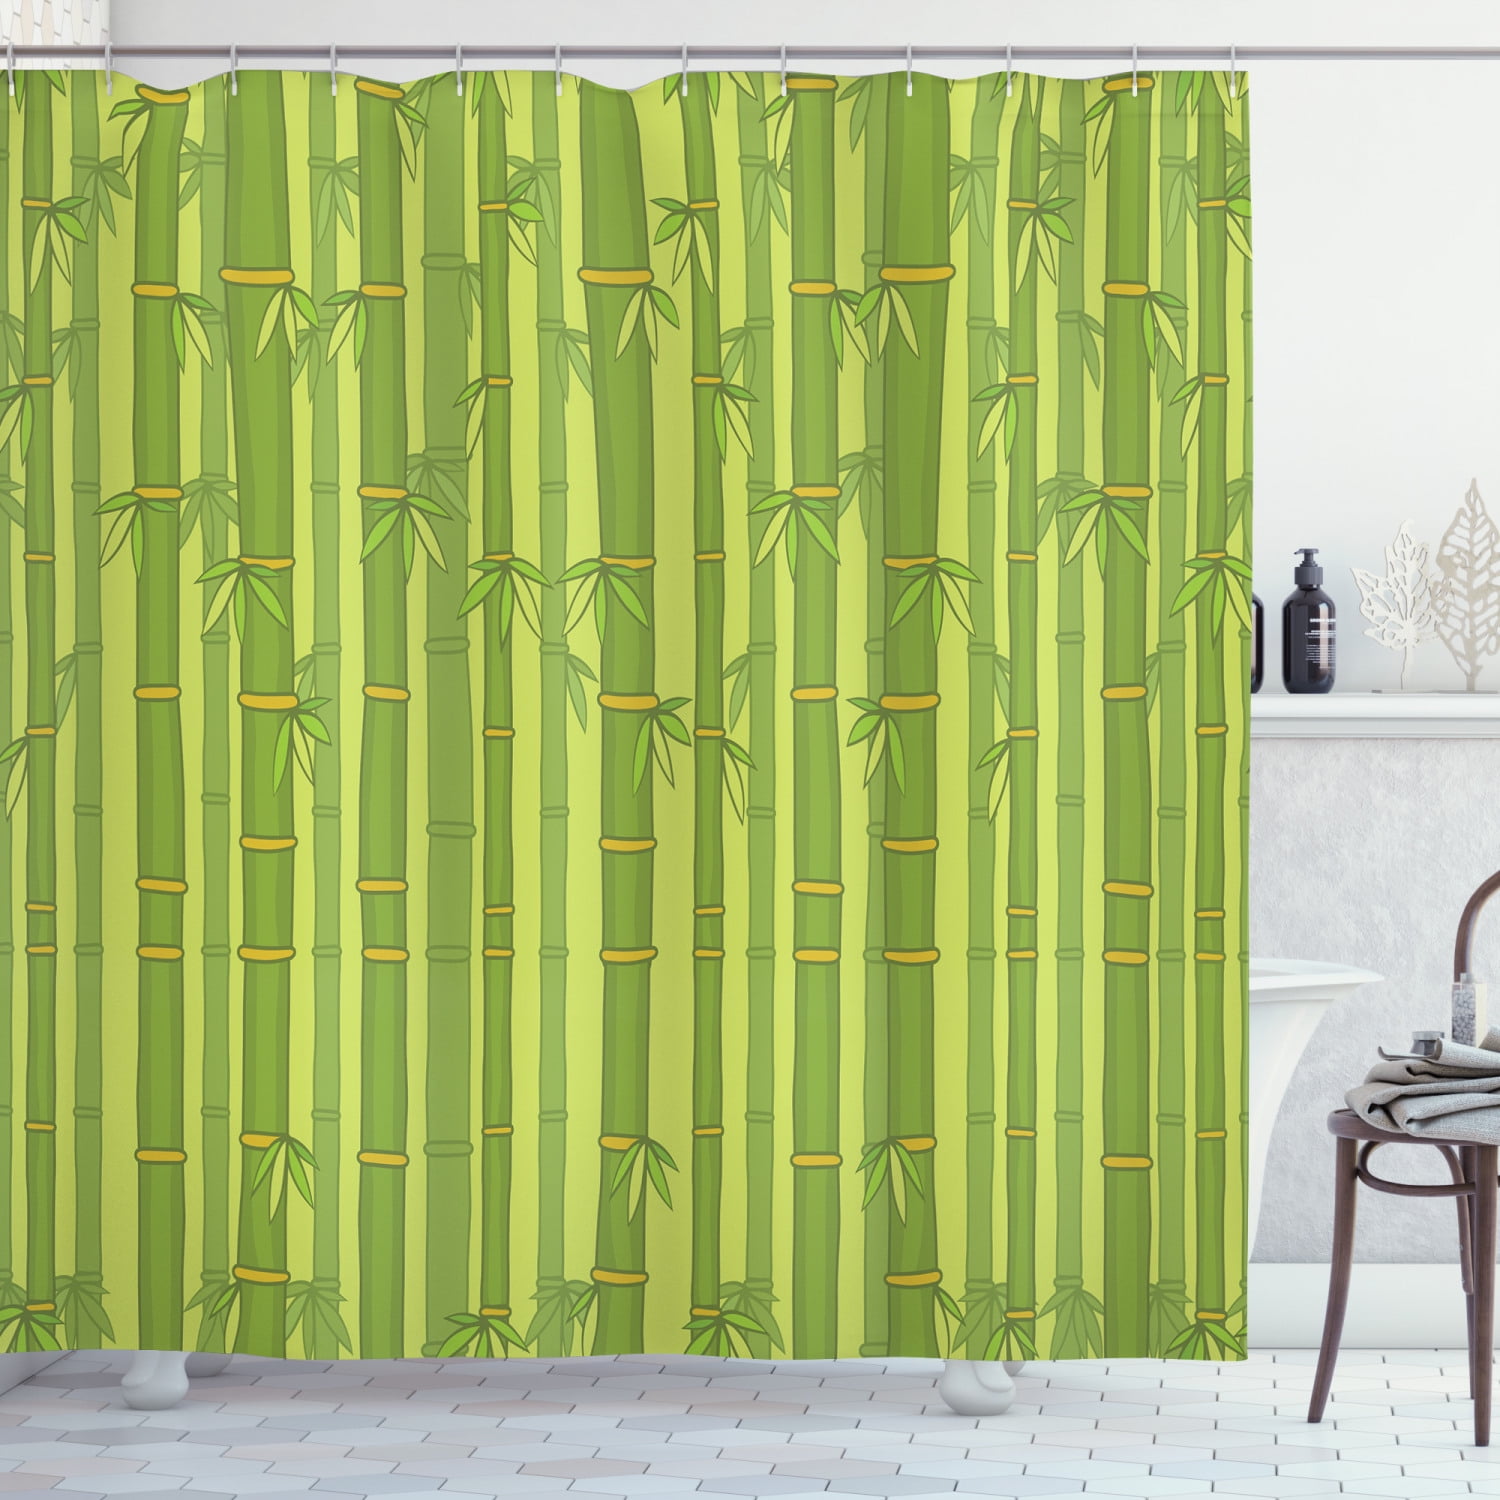 Green bamboo forest Shower Curtain Bathroom Decor Fabric & 12hooks 71*71inches 